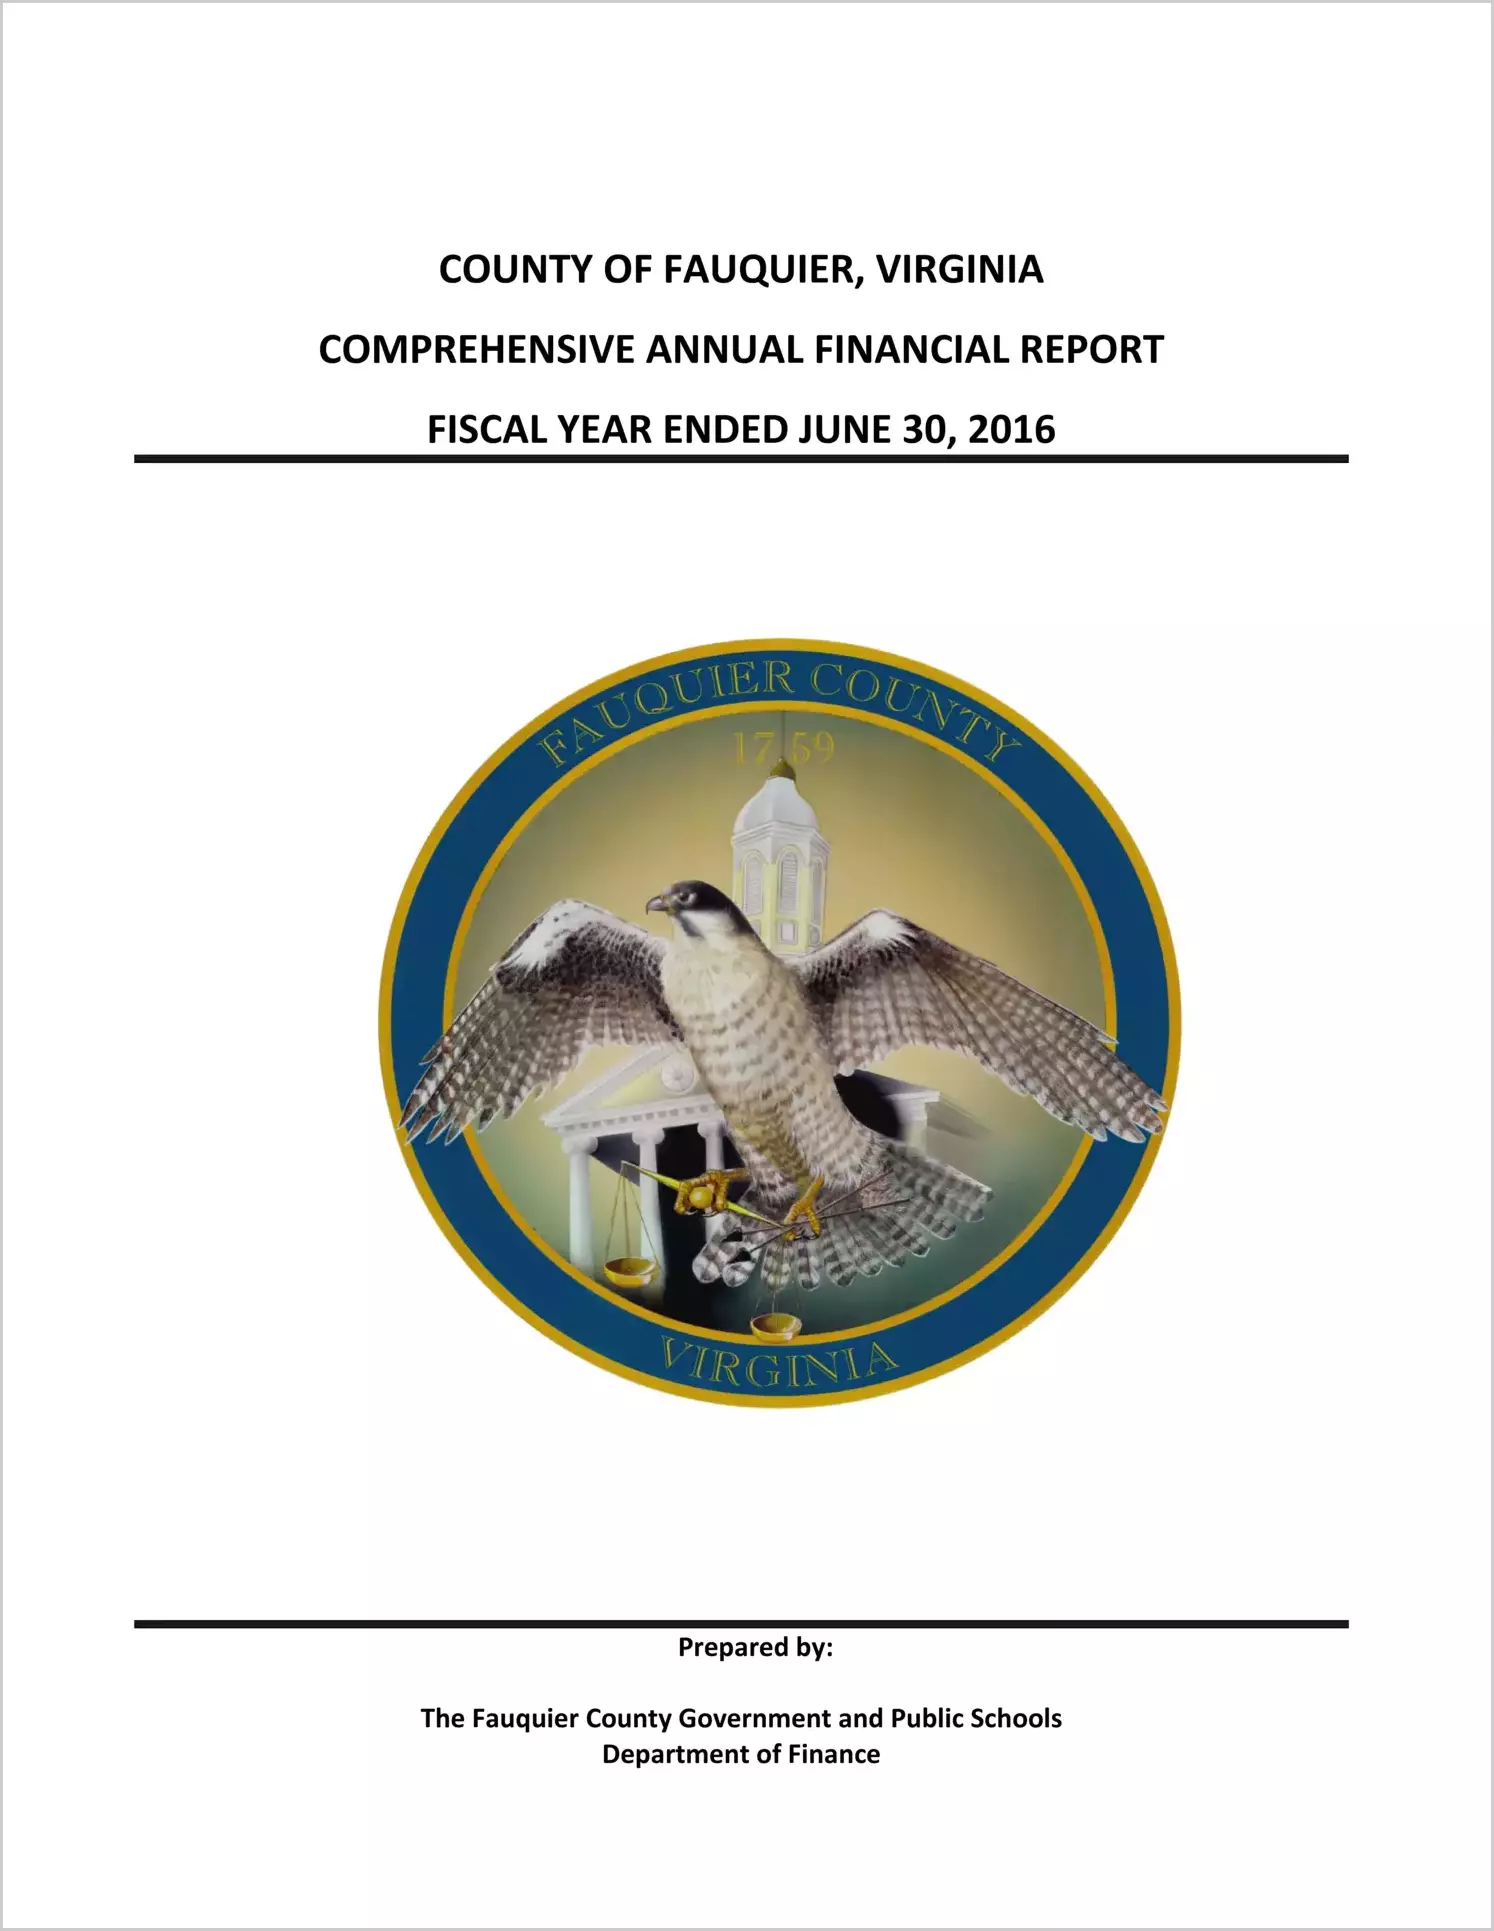 2016 Annual Financial Report for County of Fauquier